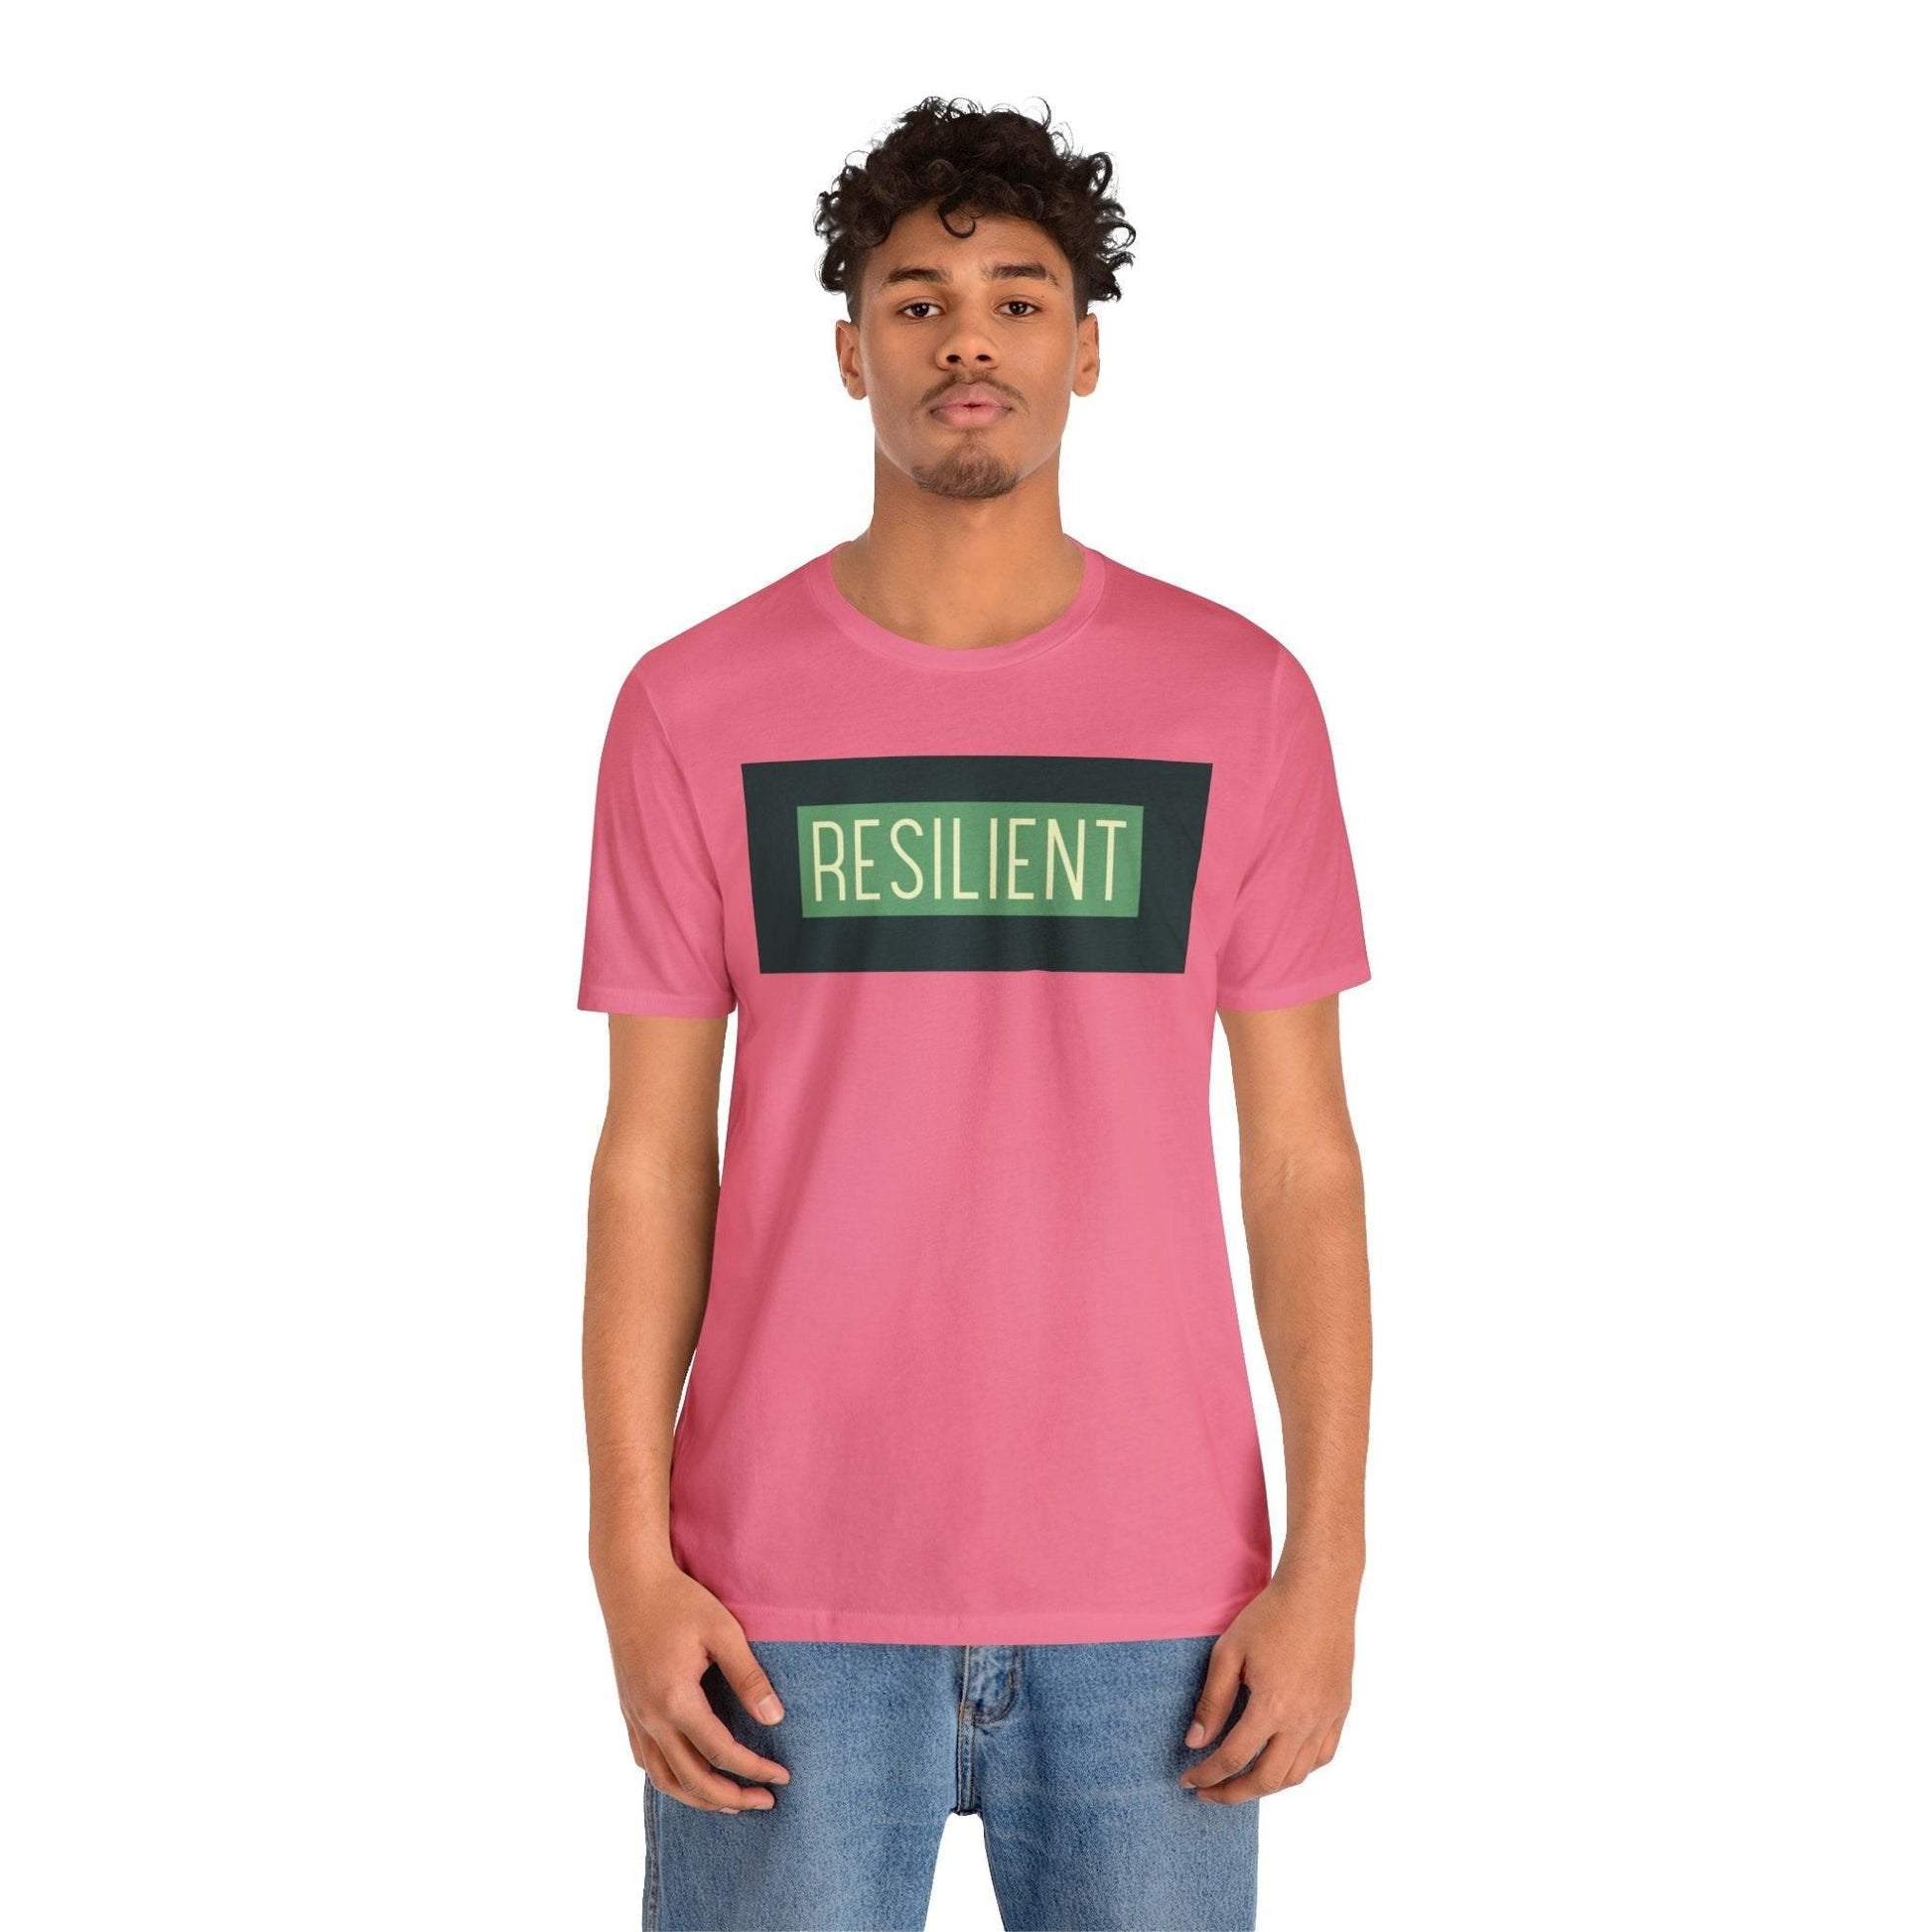 Resilient Unisex Tee T-Shirt Charity Pink XS 